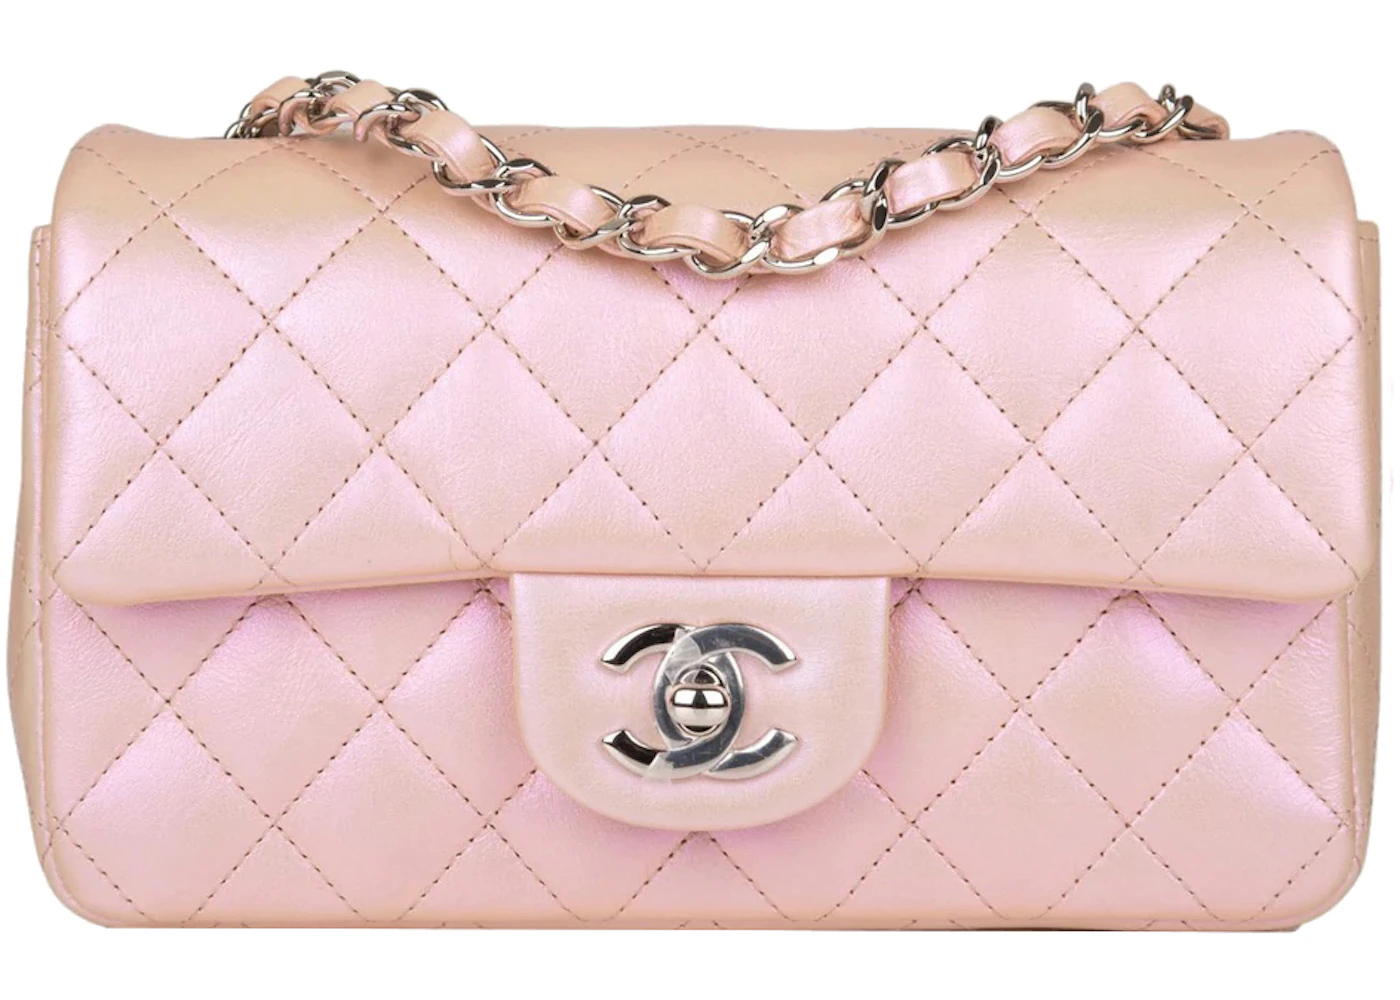 chanel pink flap